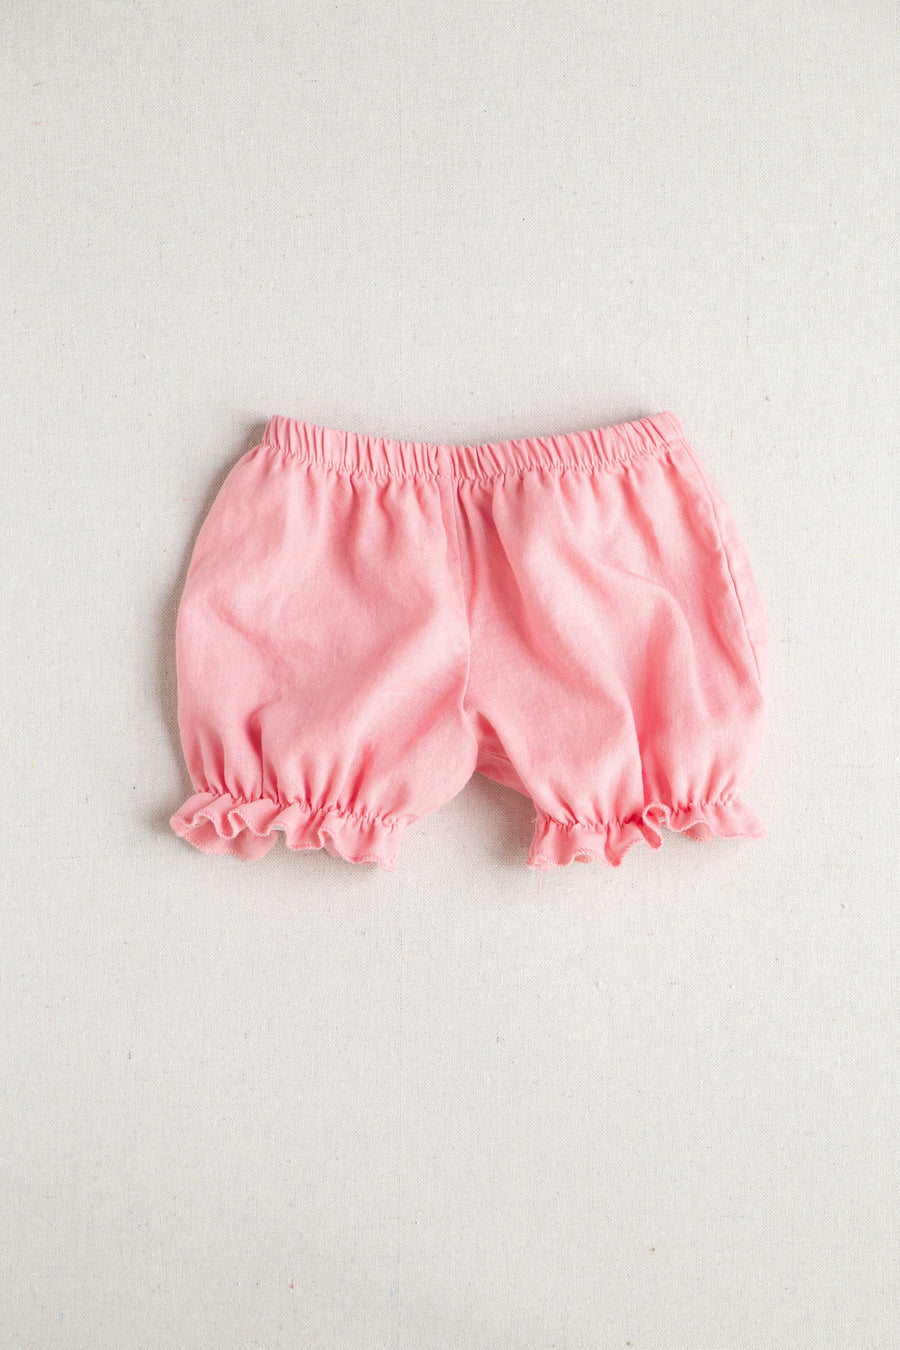 Cascade Ruffled Bloomers Spring Collection